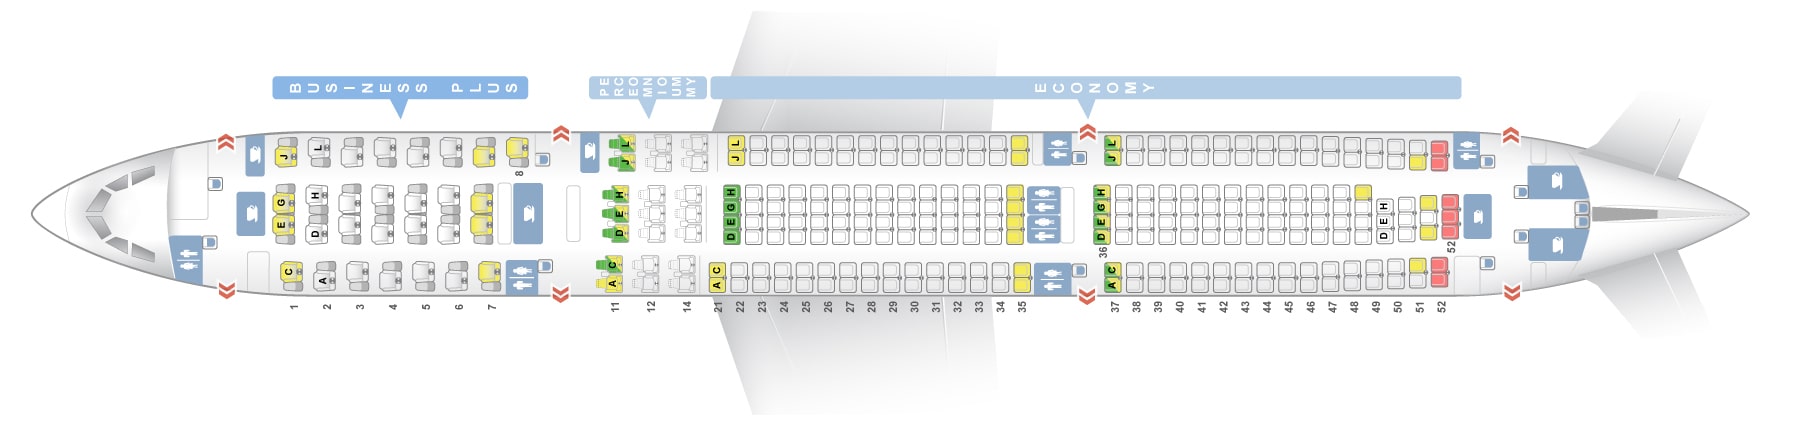 beria Airbus A330-300 Seat Map — Layout 2